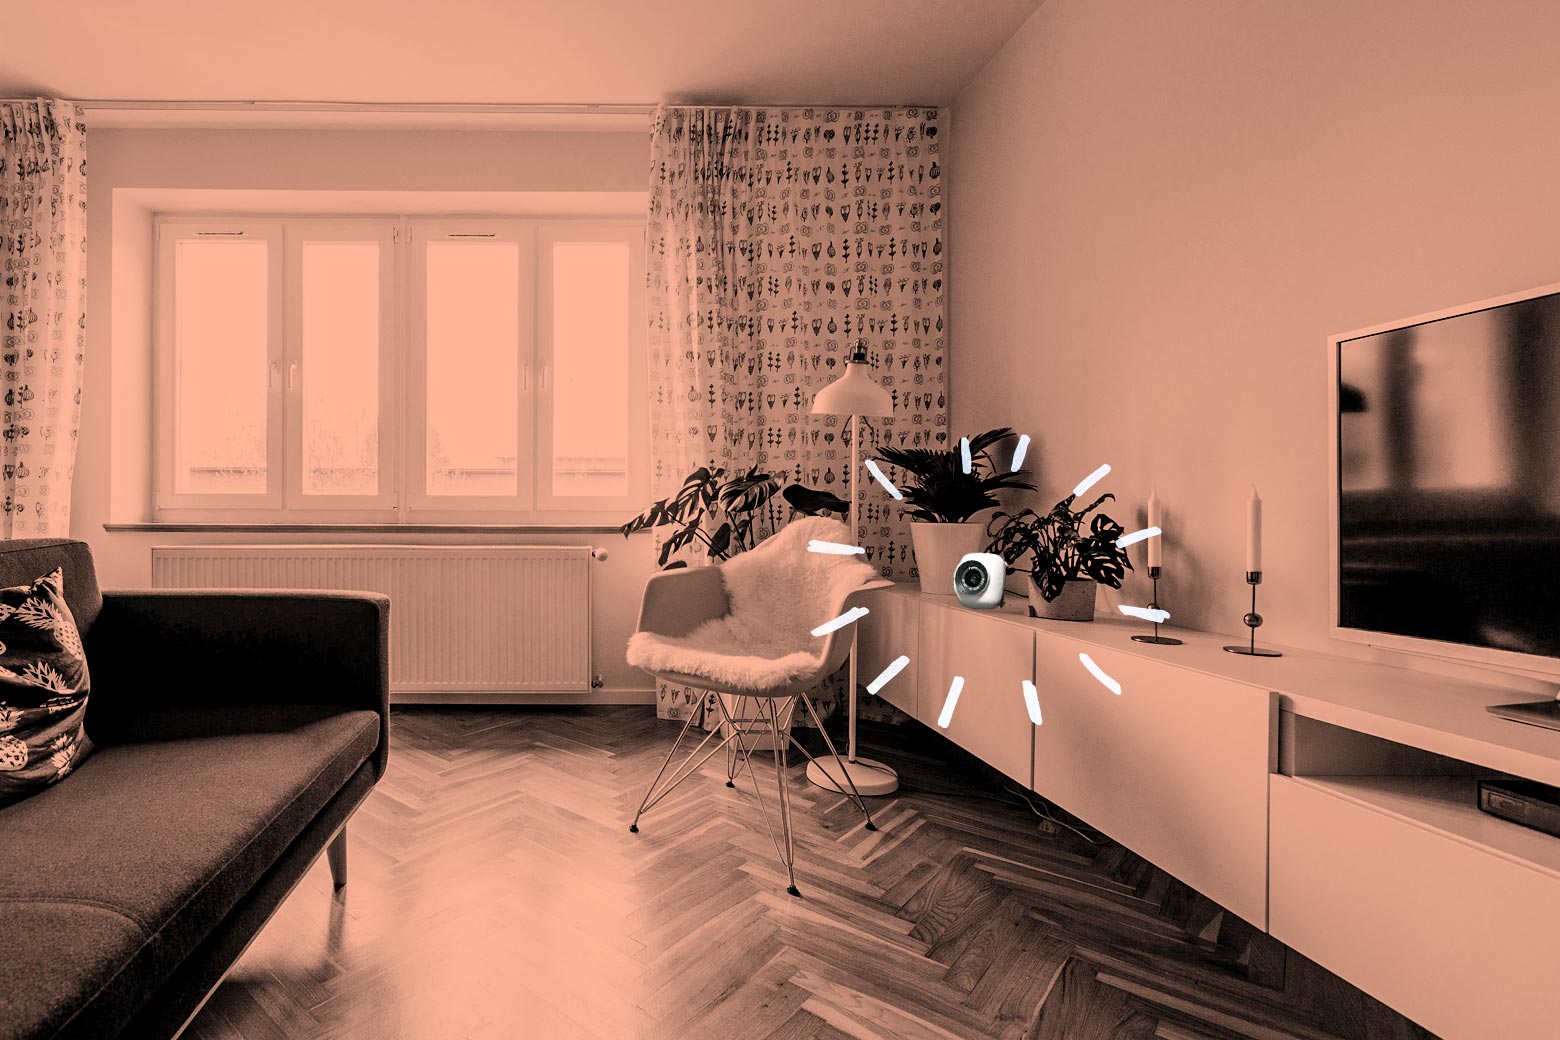 How to scan your Airbnb for hidden cameras. pic